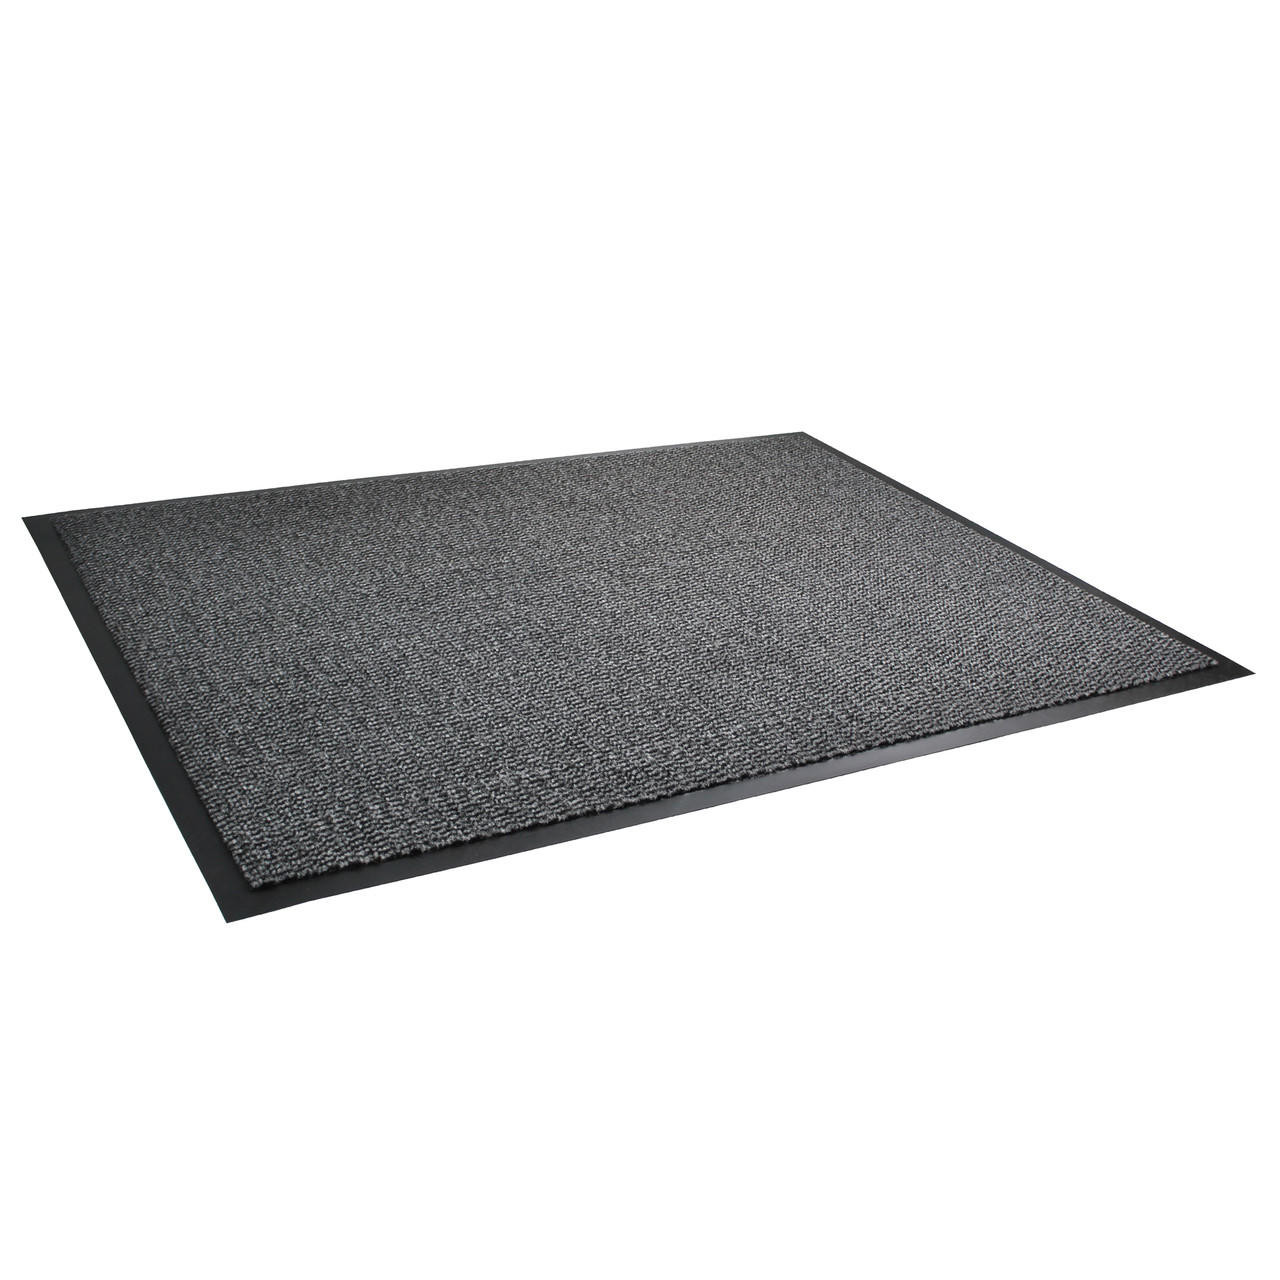 https://cdn11.bigcommerce.com/s-fjwps1jbkv/images/stencil/1280x1280/products/147/3933/ultralux-indoor-entrance-mat-or-polypropylene-fibers-and-anti-slip-vinyl-backed-entry-rug-doormat-or-gray__77483.1689079416.jpg?c=2?imbypass=on